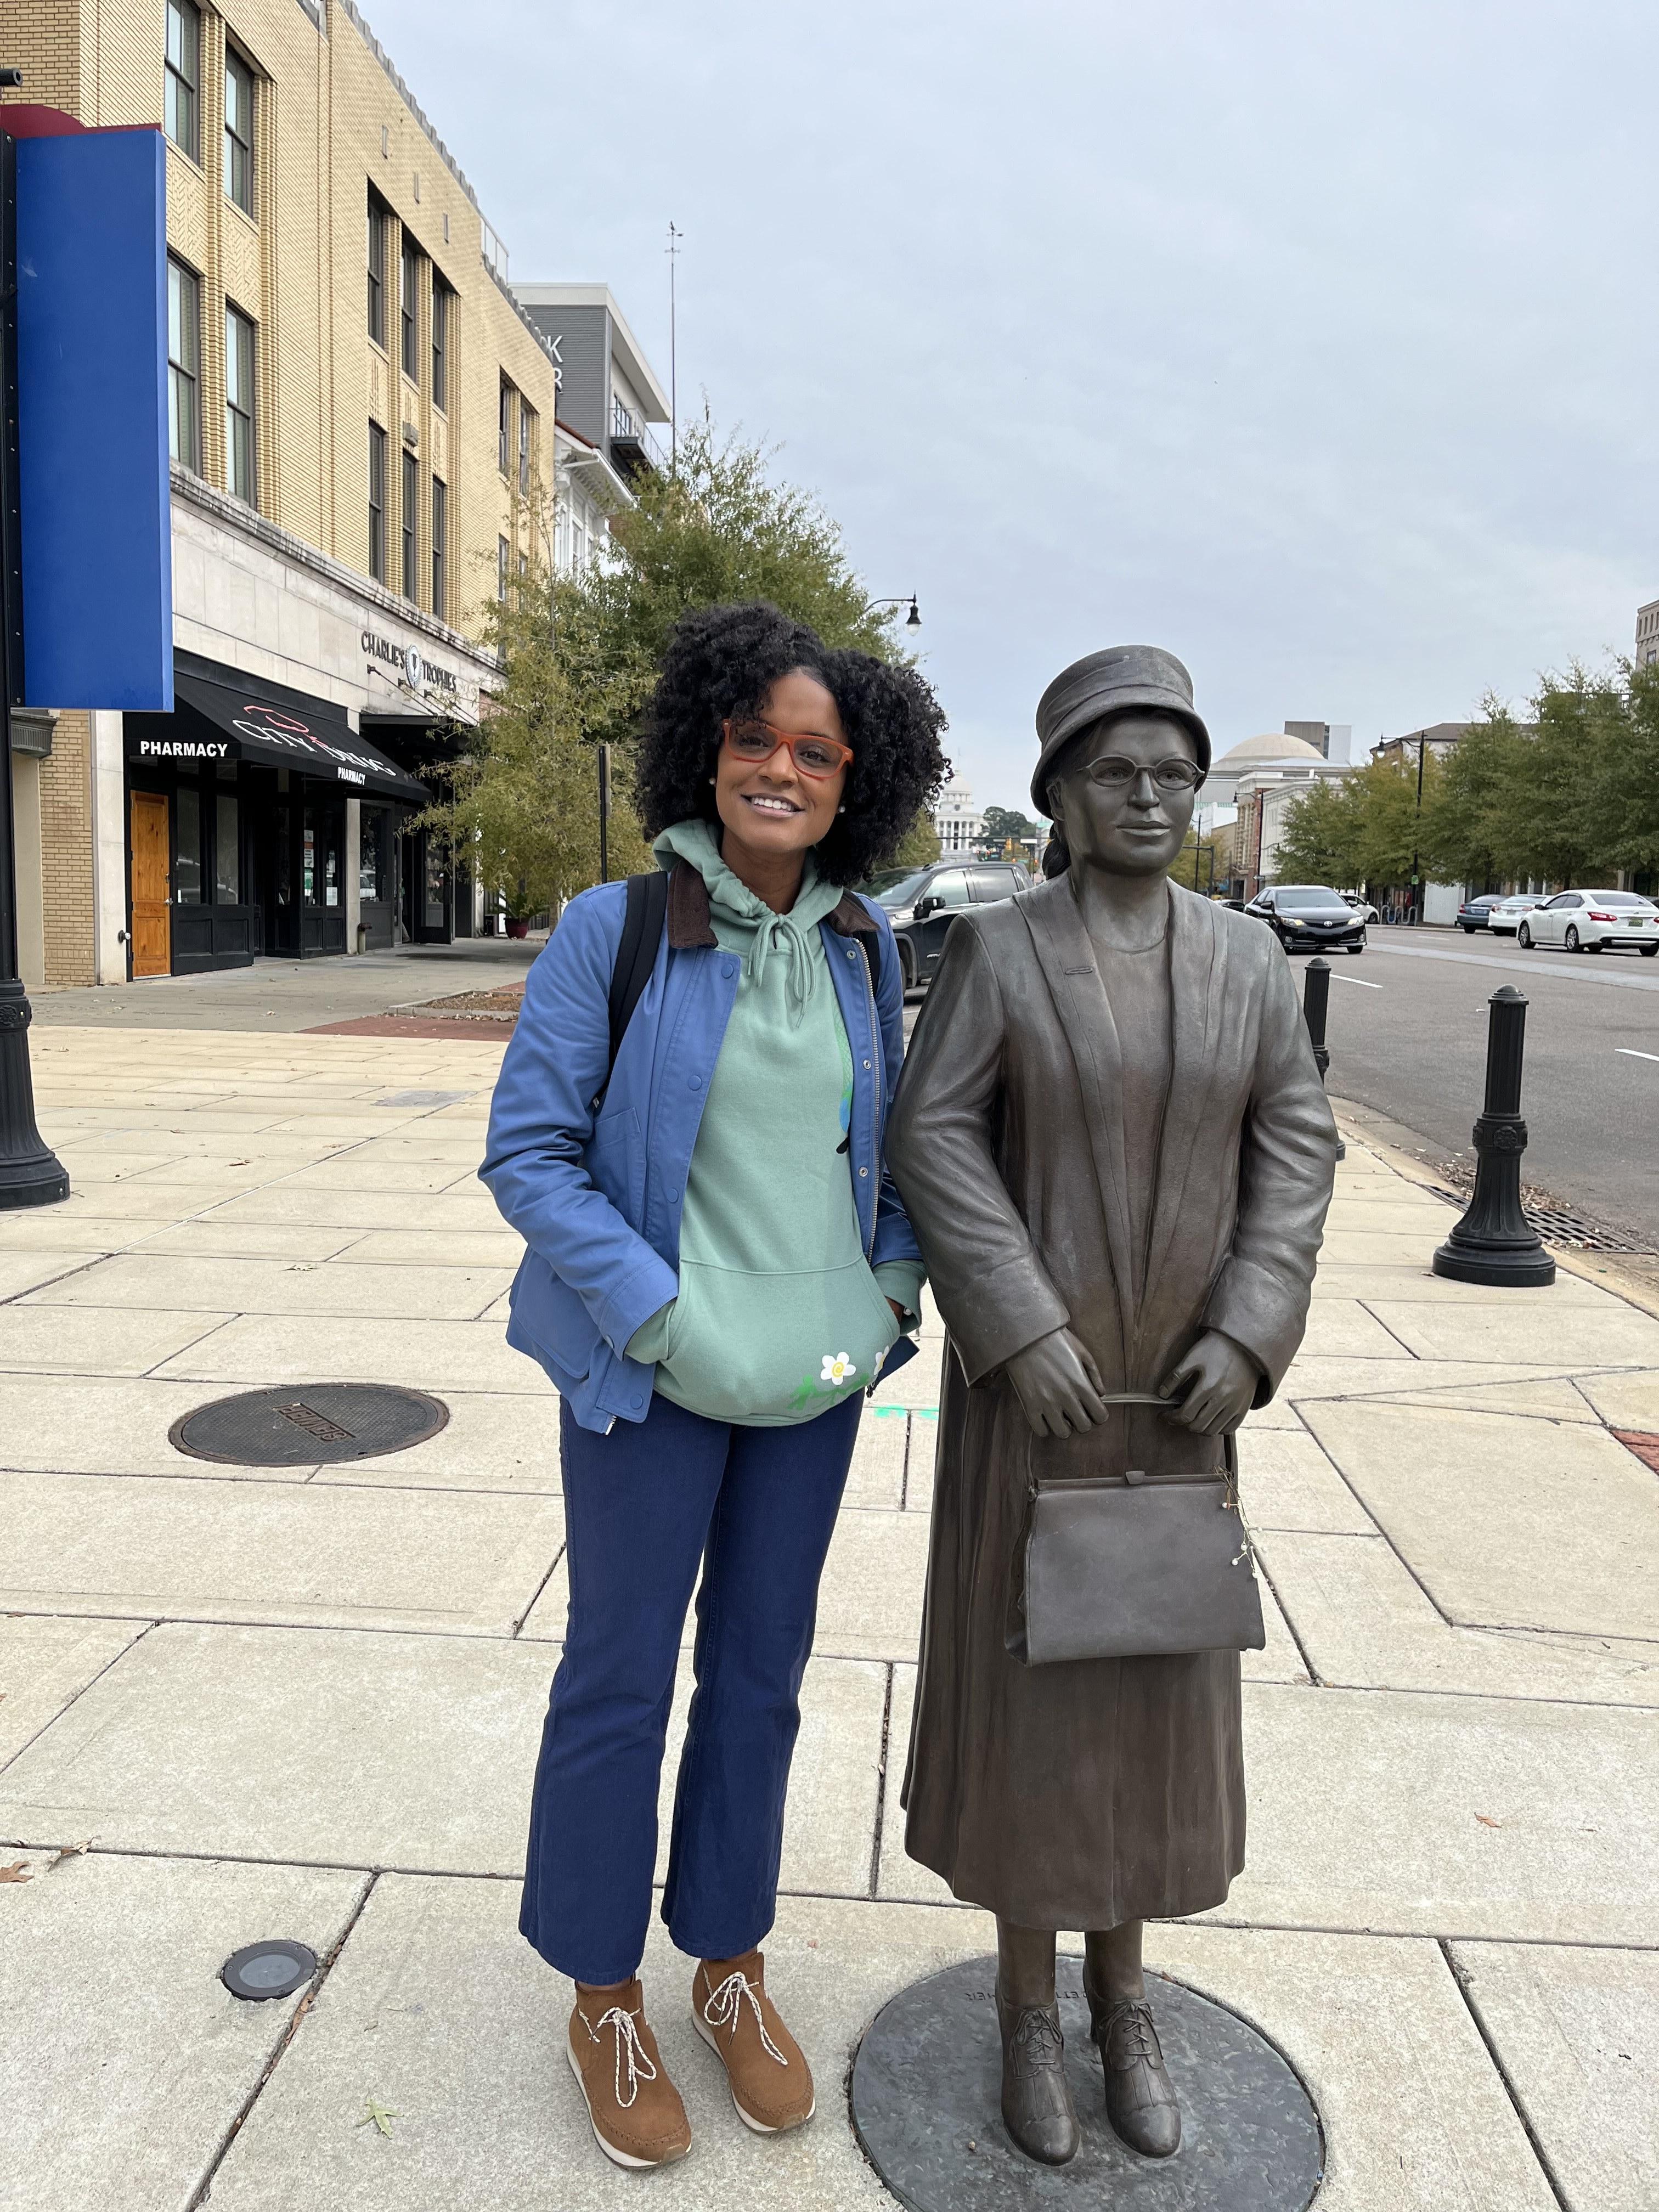 Associate Professor Jennifer D. Roberts with statue of Rosa Parks in Montgomery, Alabama (November 19, 2022). Photo by AJ.